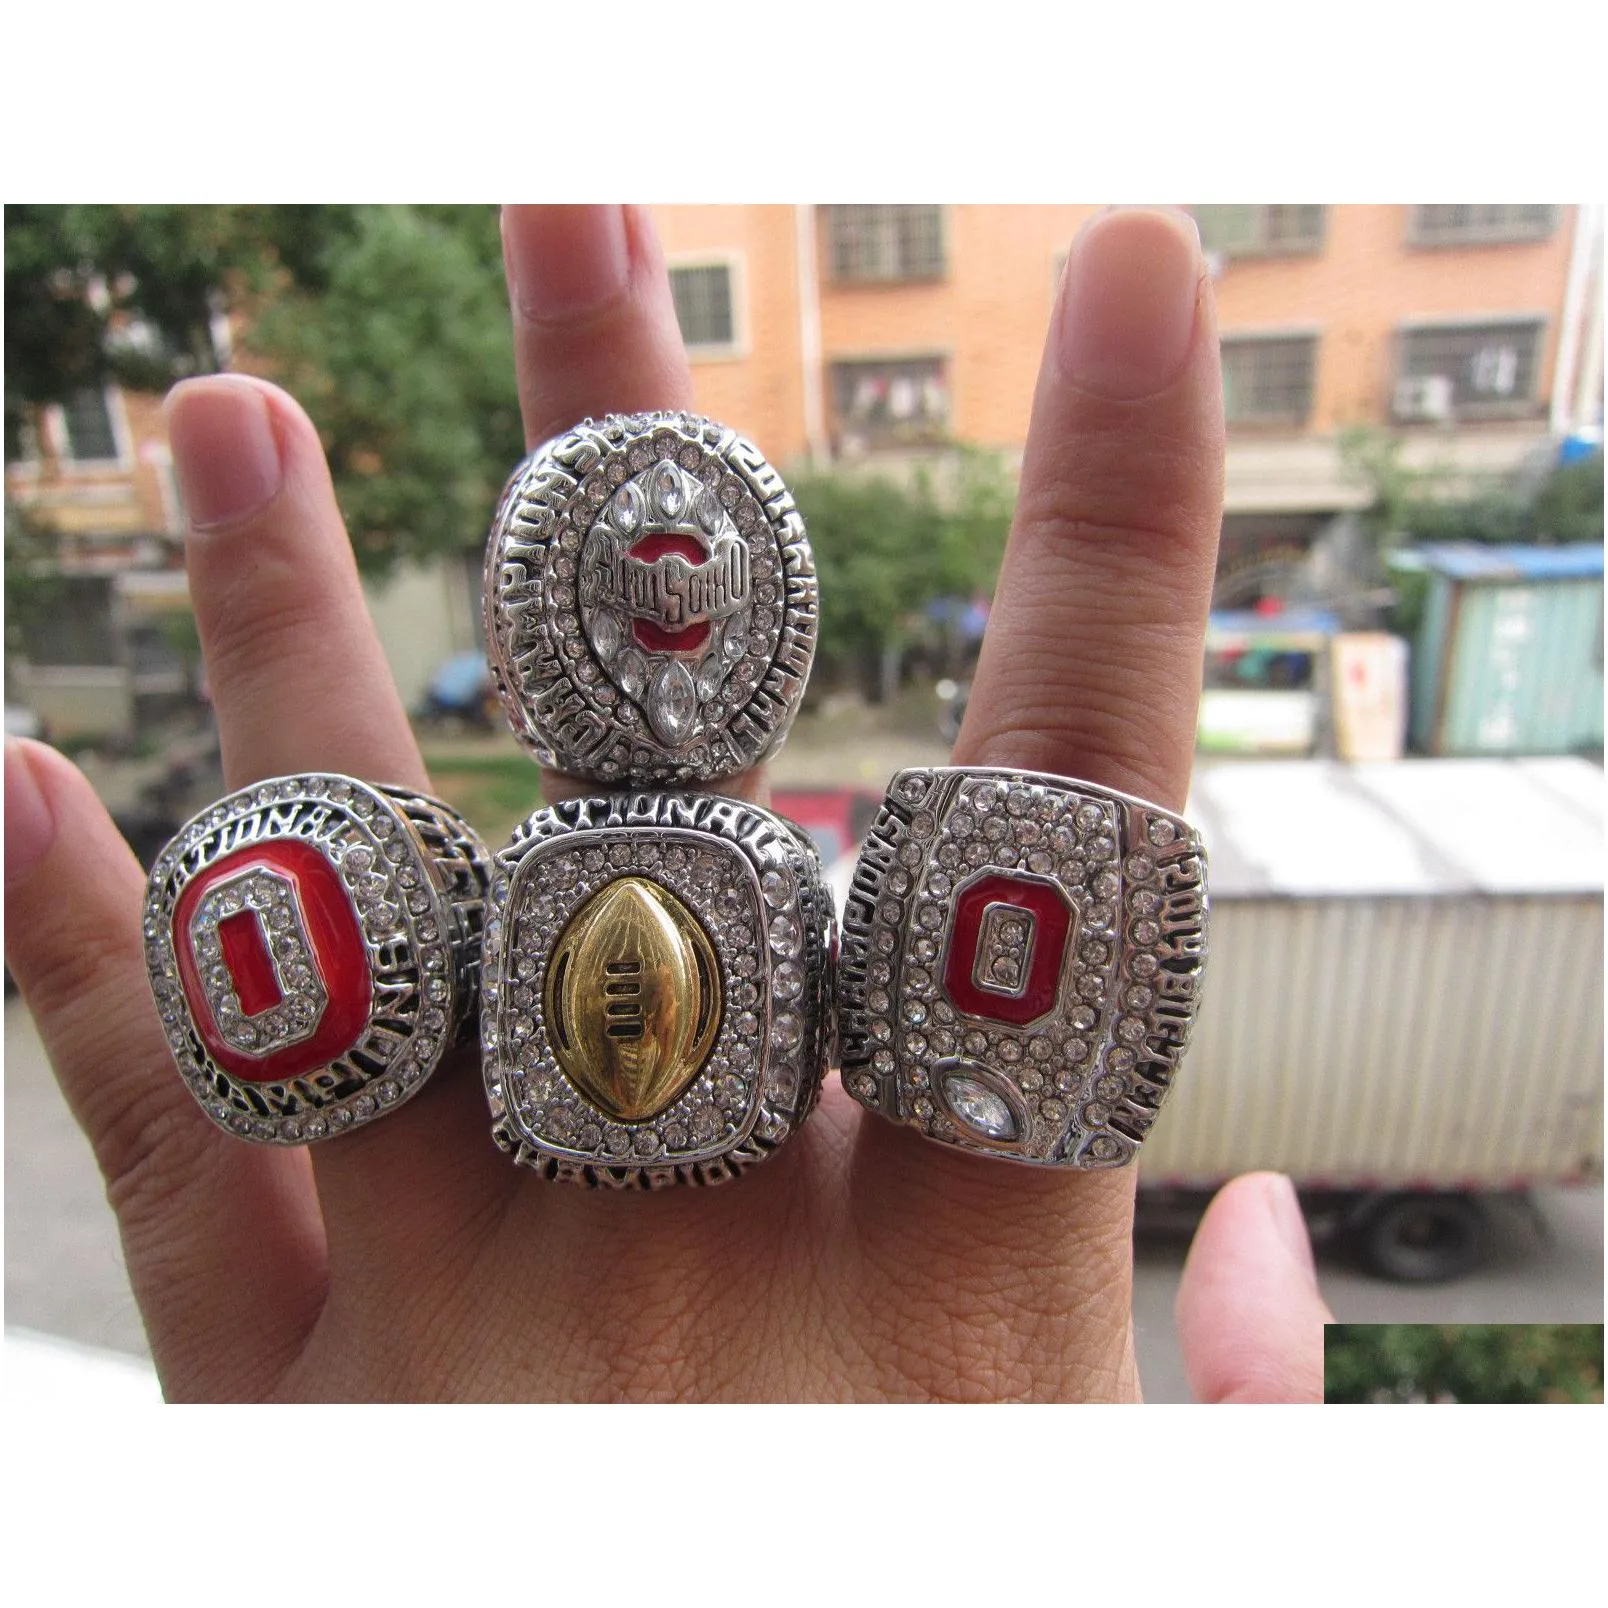 Cluster Rings Ohio State 4Pcs Football National Championship Ring With Wooden Display Box Souvenir Men Fan Gift Wholesale Drop Drop De Dhmgo